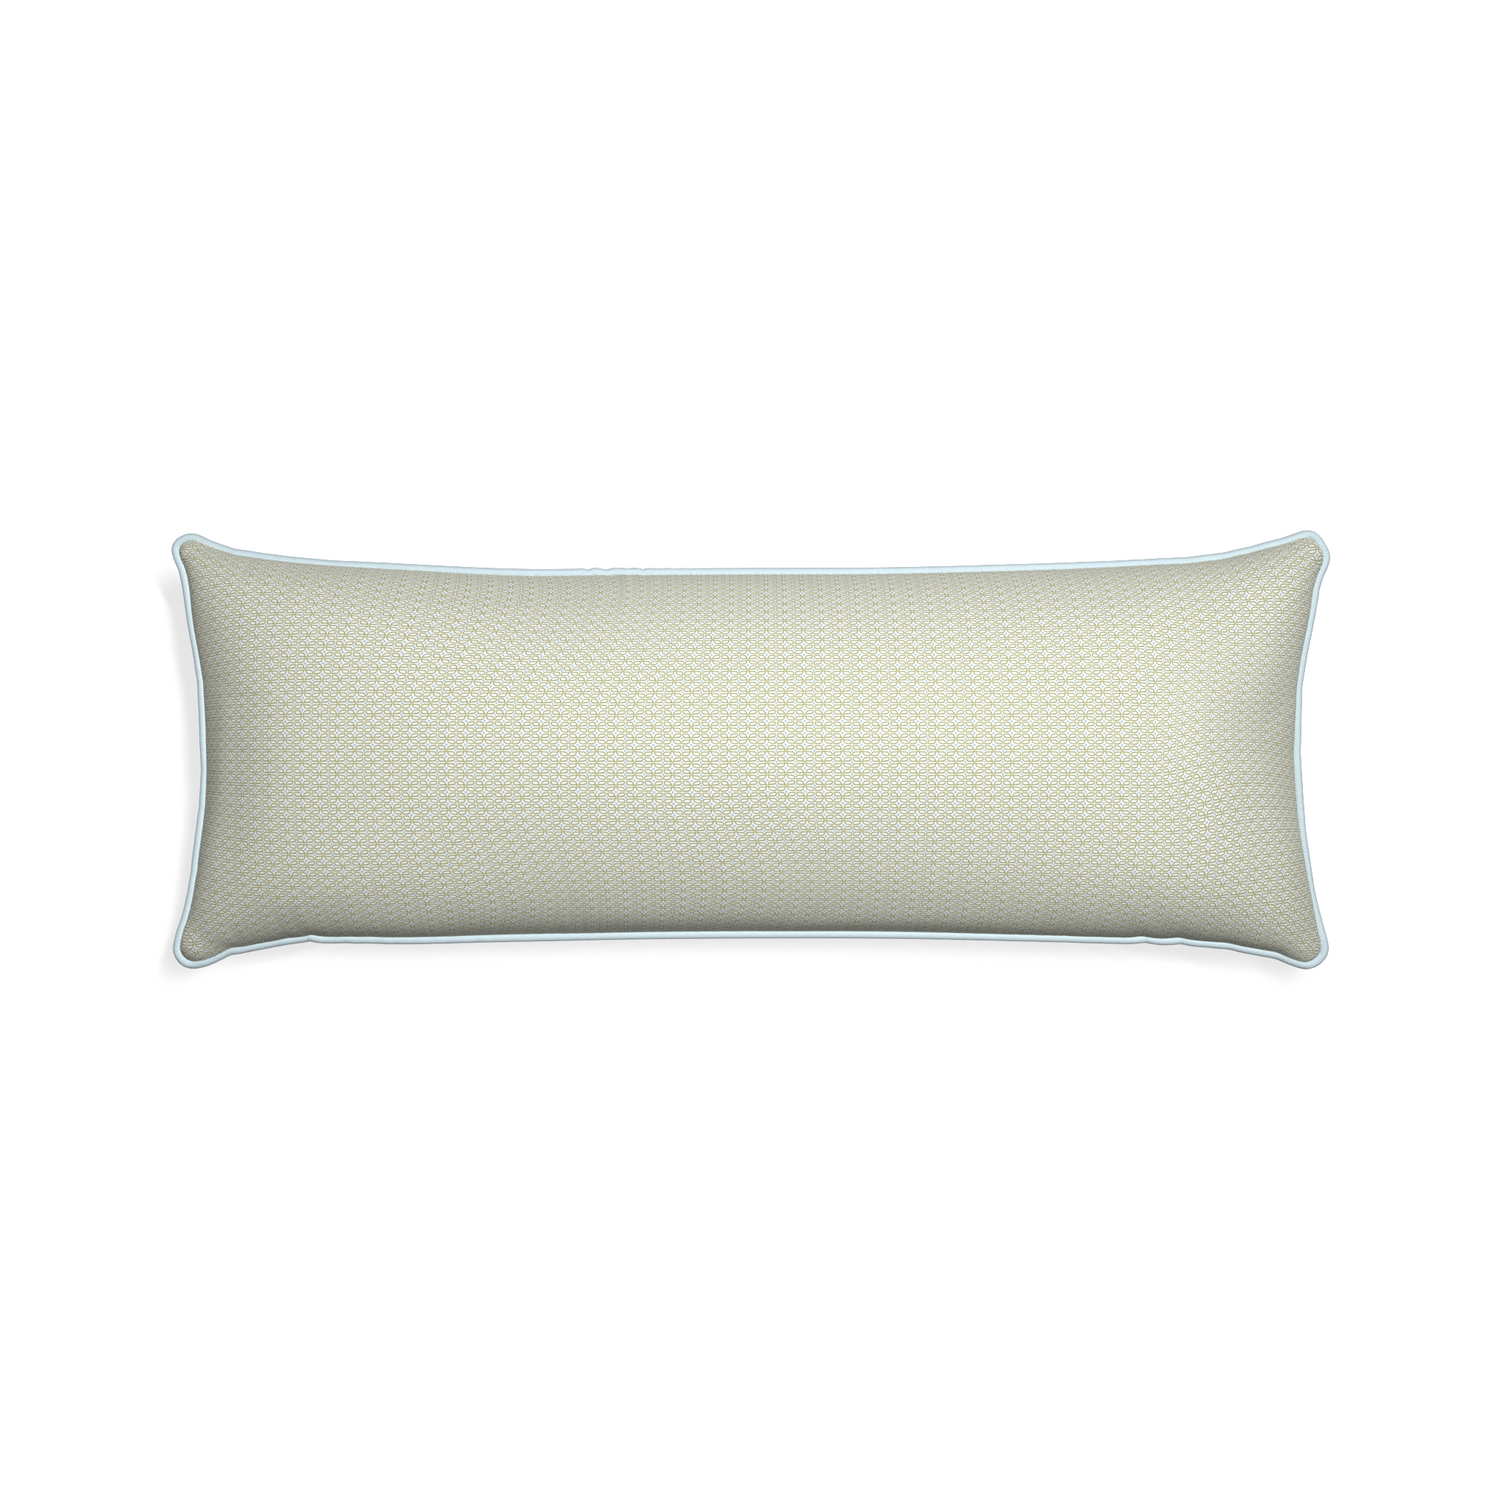 Xl-lumbar loomi moss custom pillow with powder piping on white background